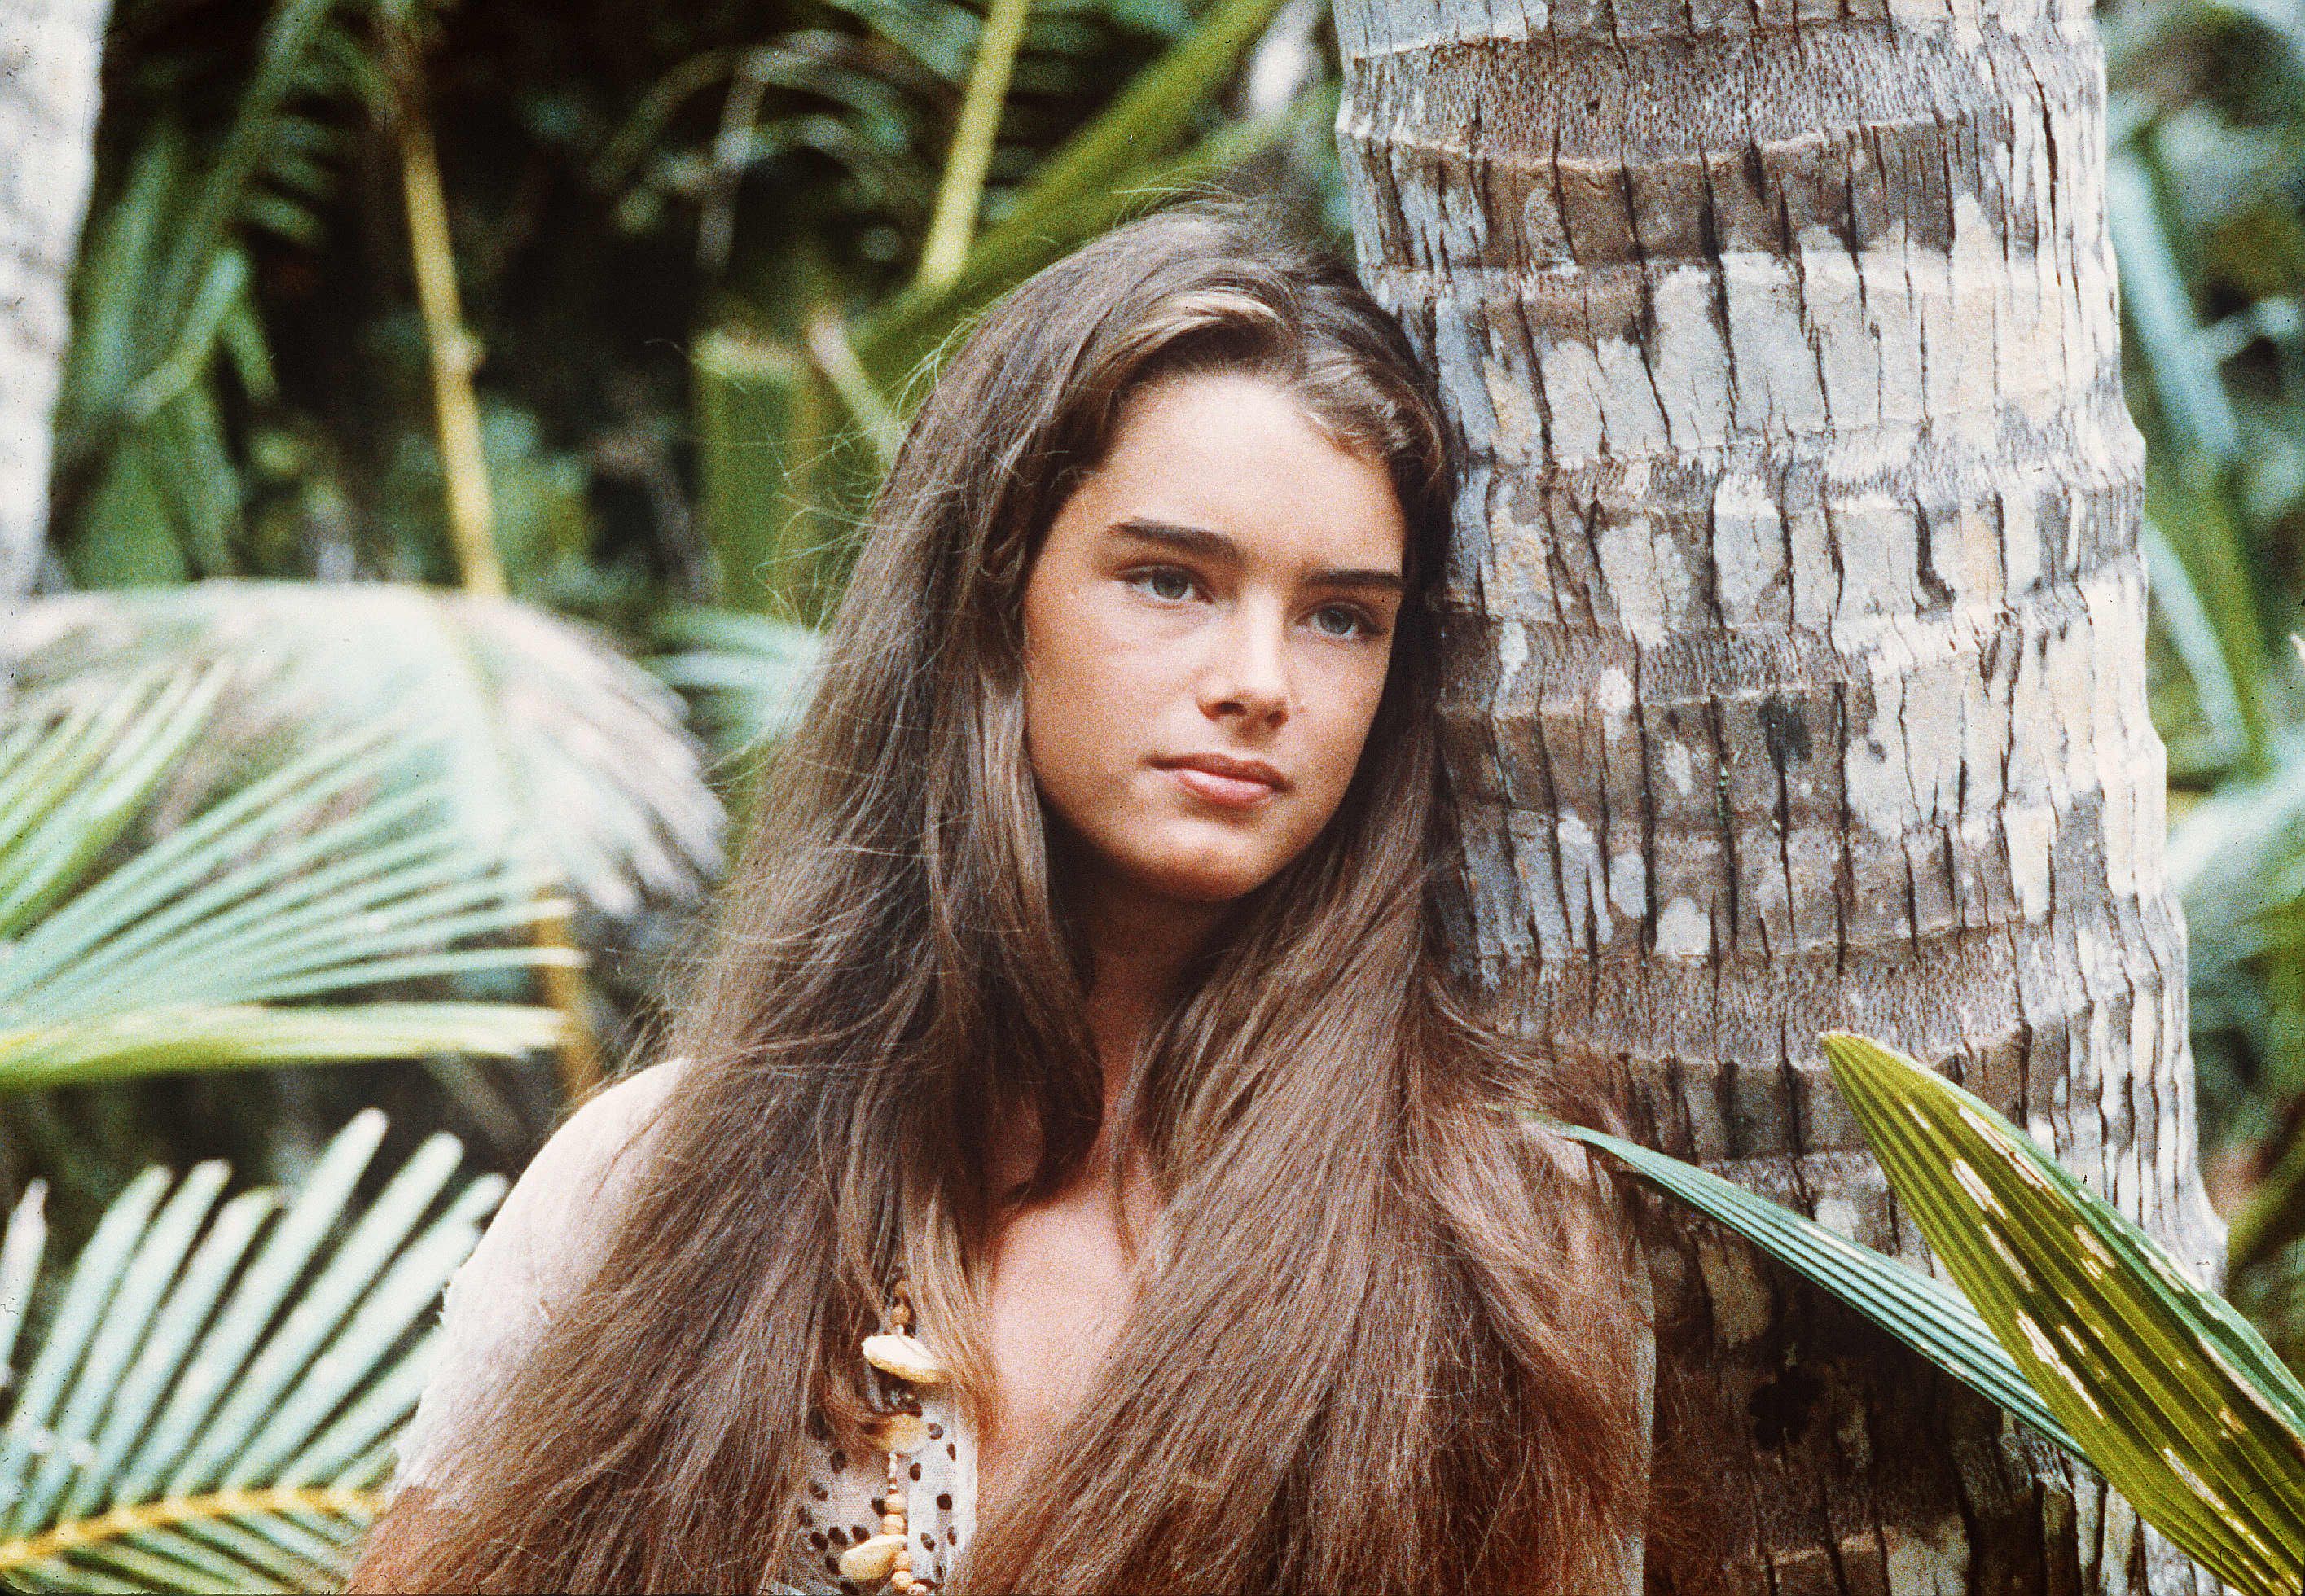 29.5k Likes, 318 Comments - Brooke Shields (@brookeshields) on Instagram:  “Oh, it's Monday?...” | Brooke shields, Hair styles, Hair inspiration